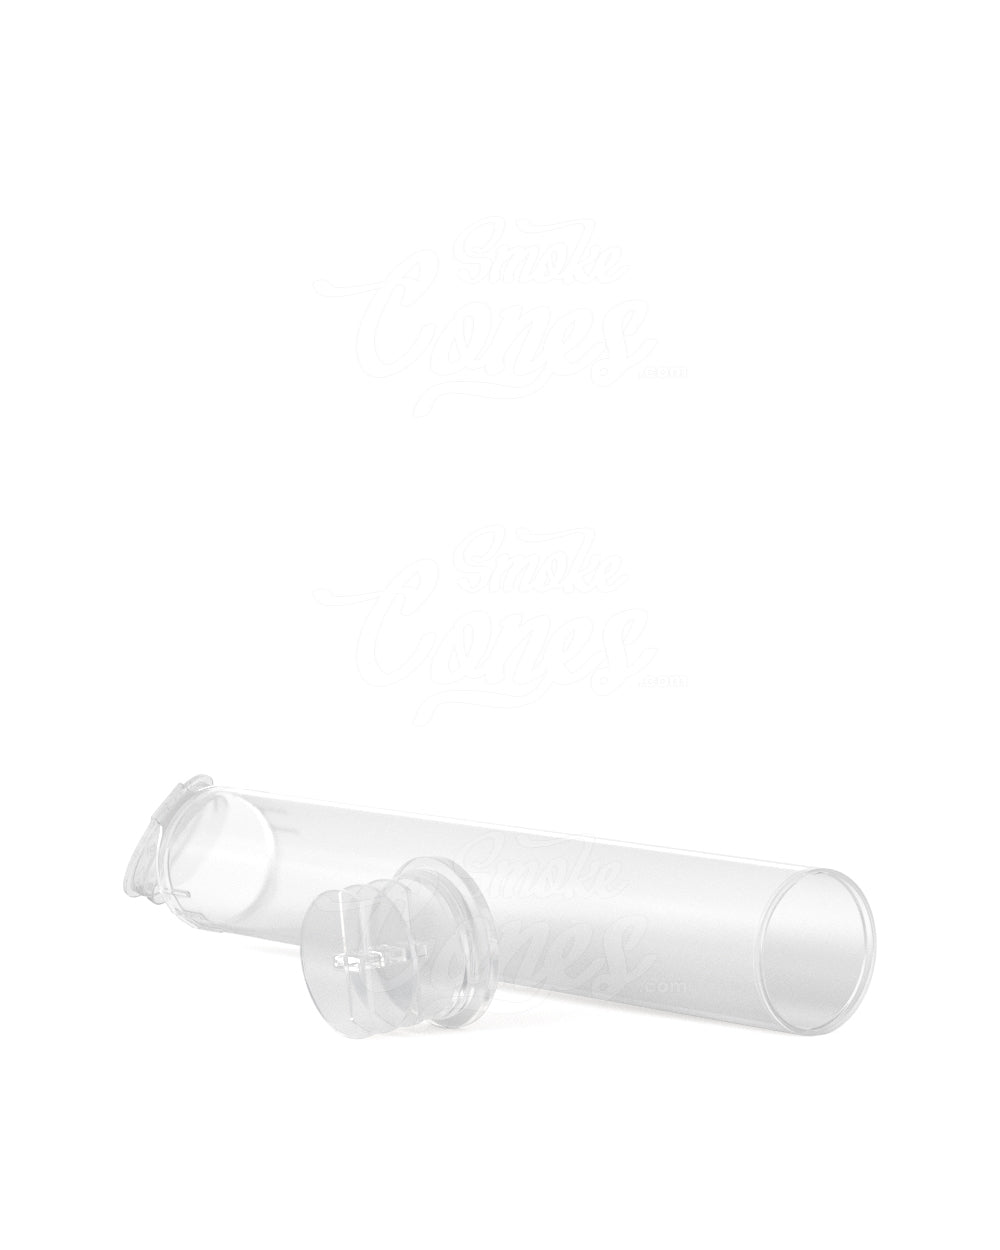 125mm Clear Transparent Thingymajiggy Pre-Roll Storage Tubes with Ash Trap 400/Box - 9